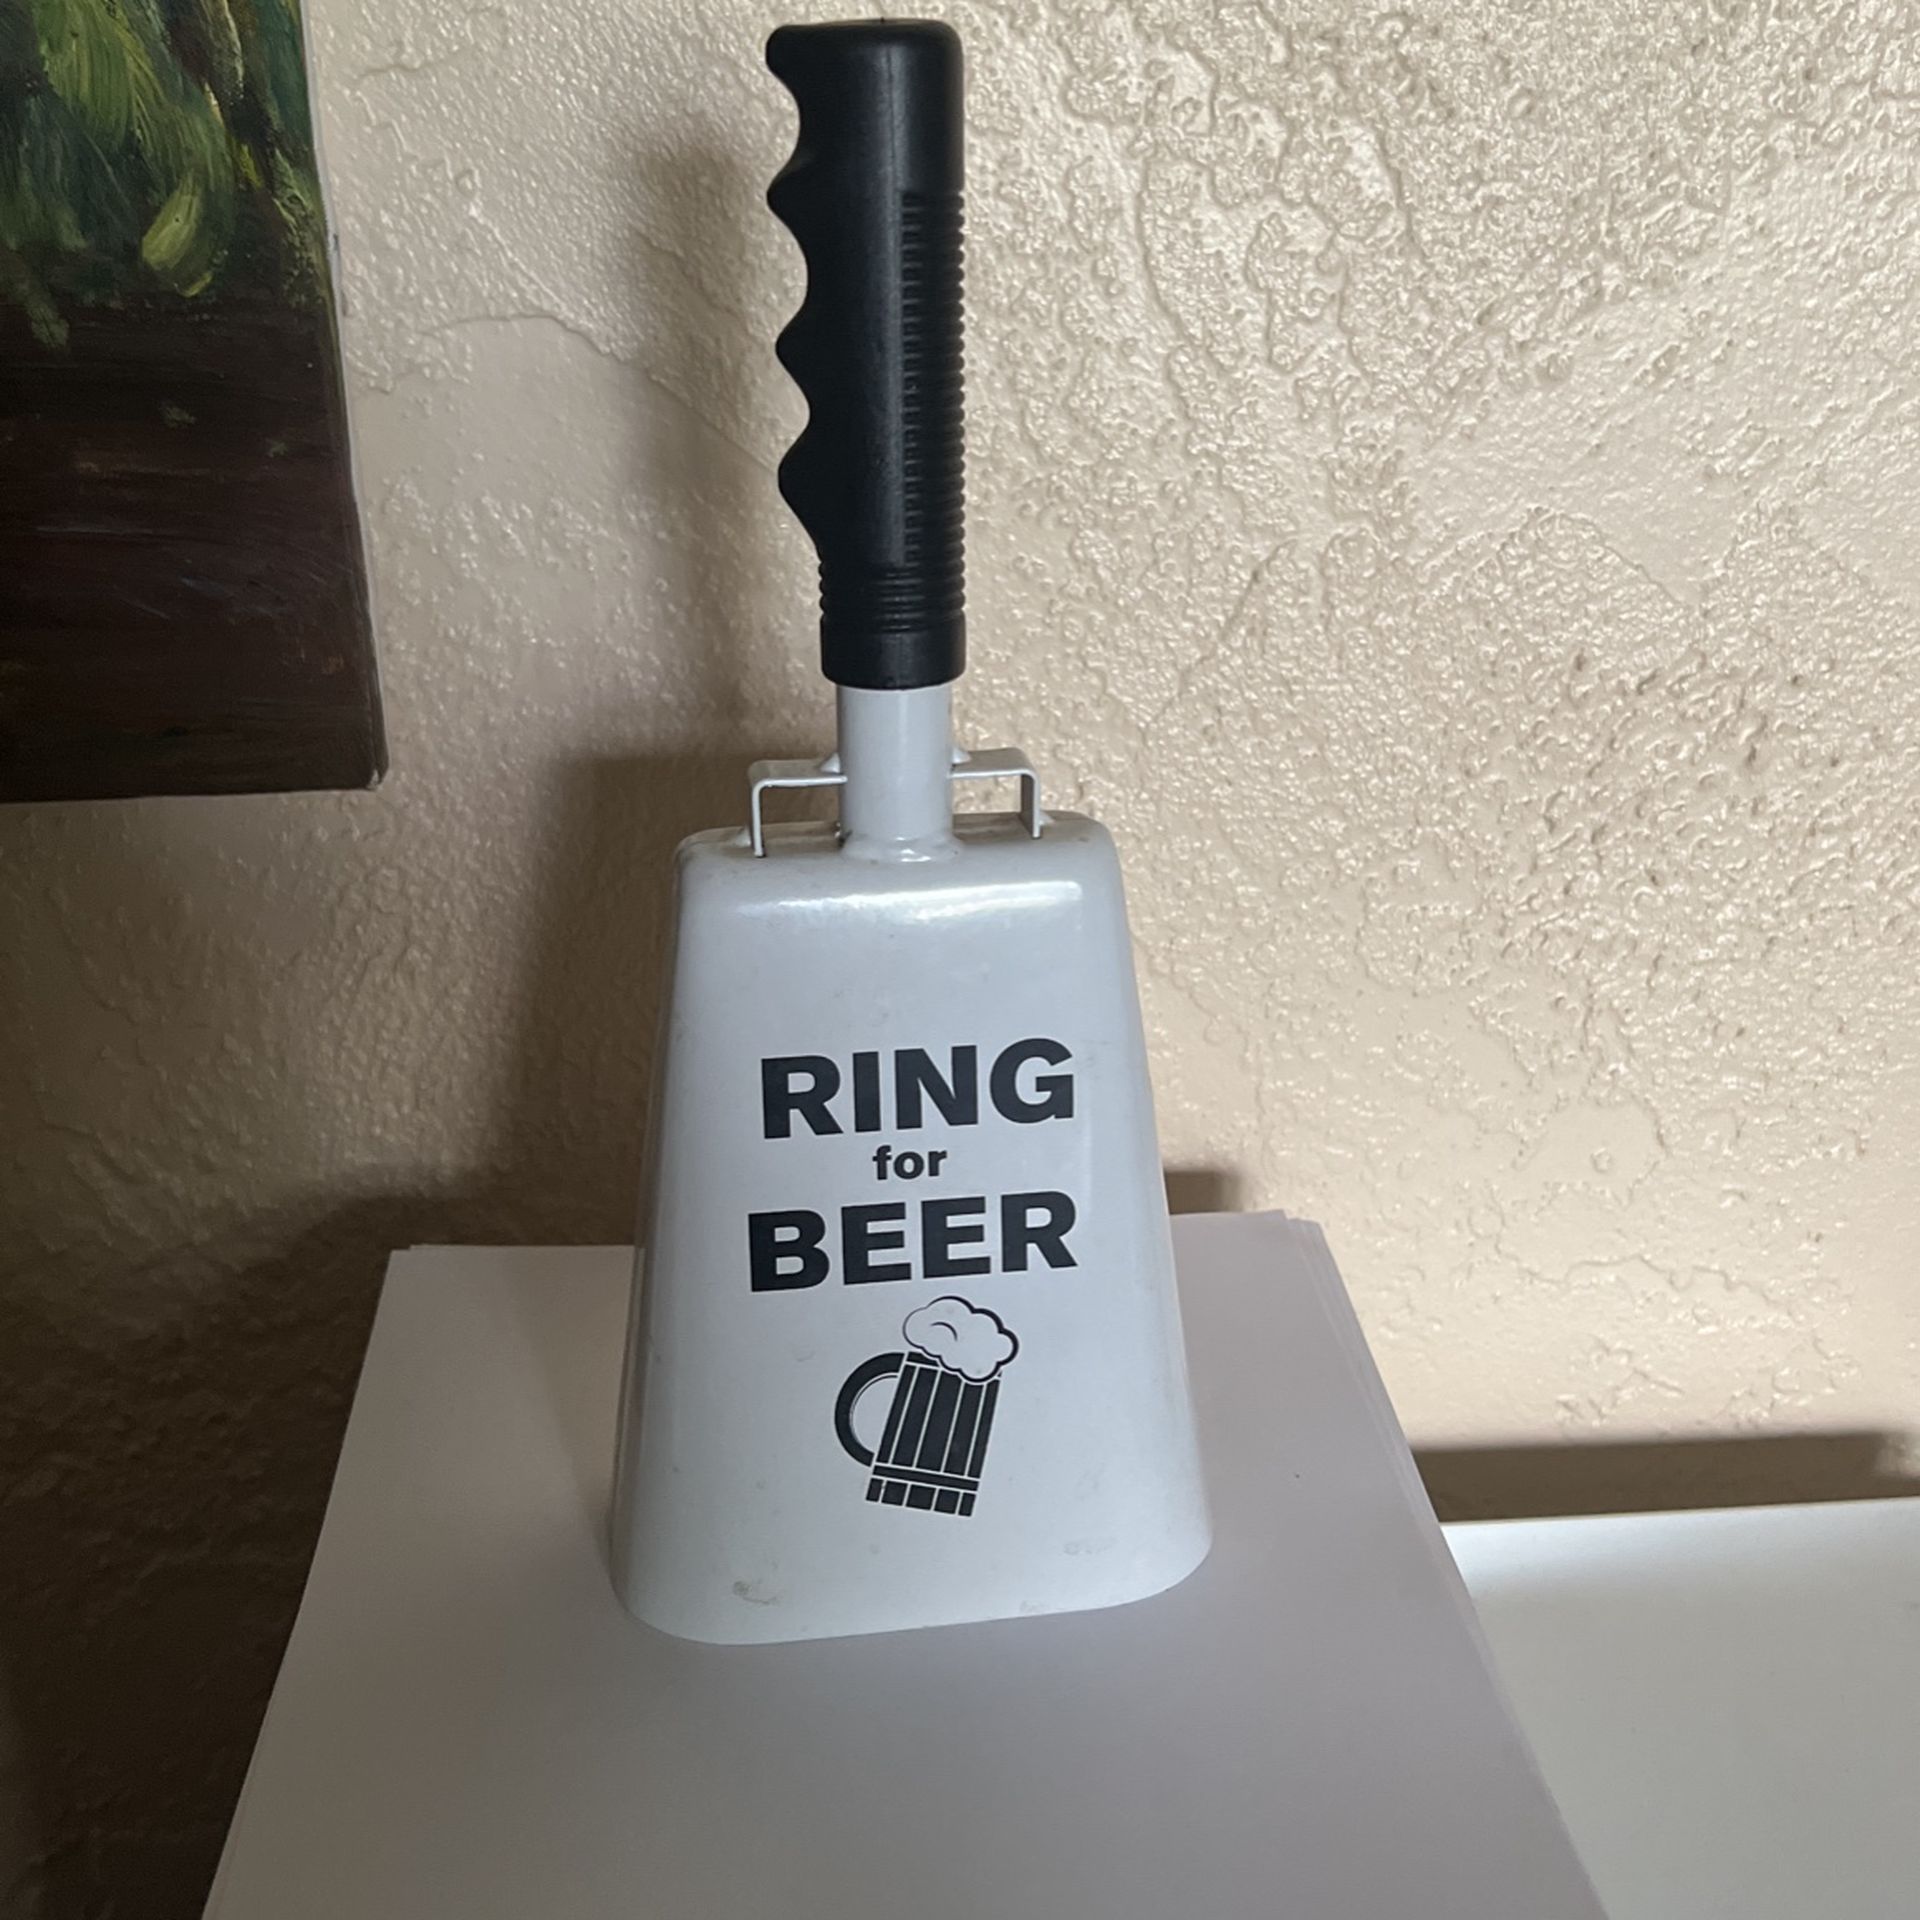 A ring for beer bell $12